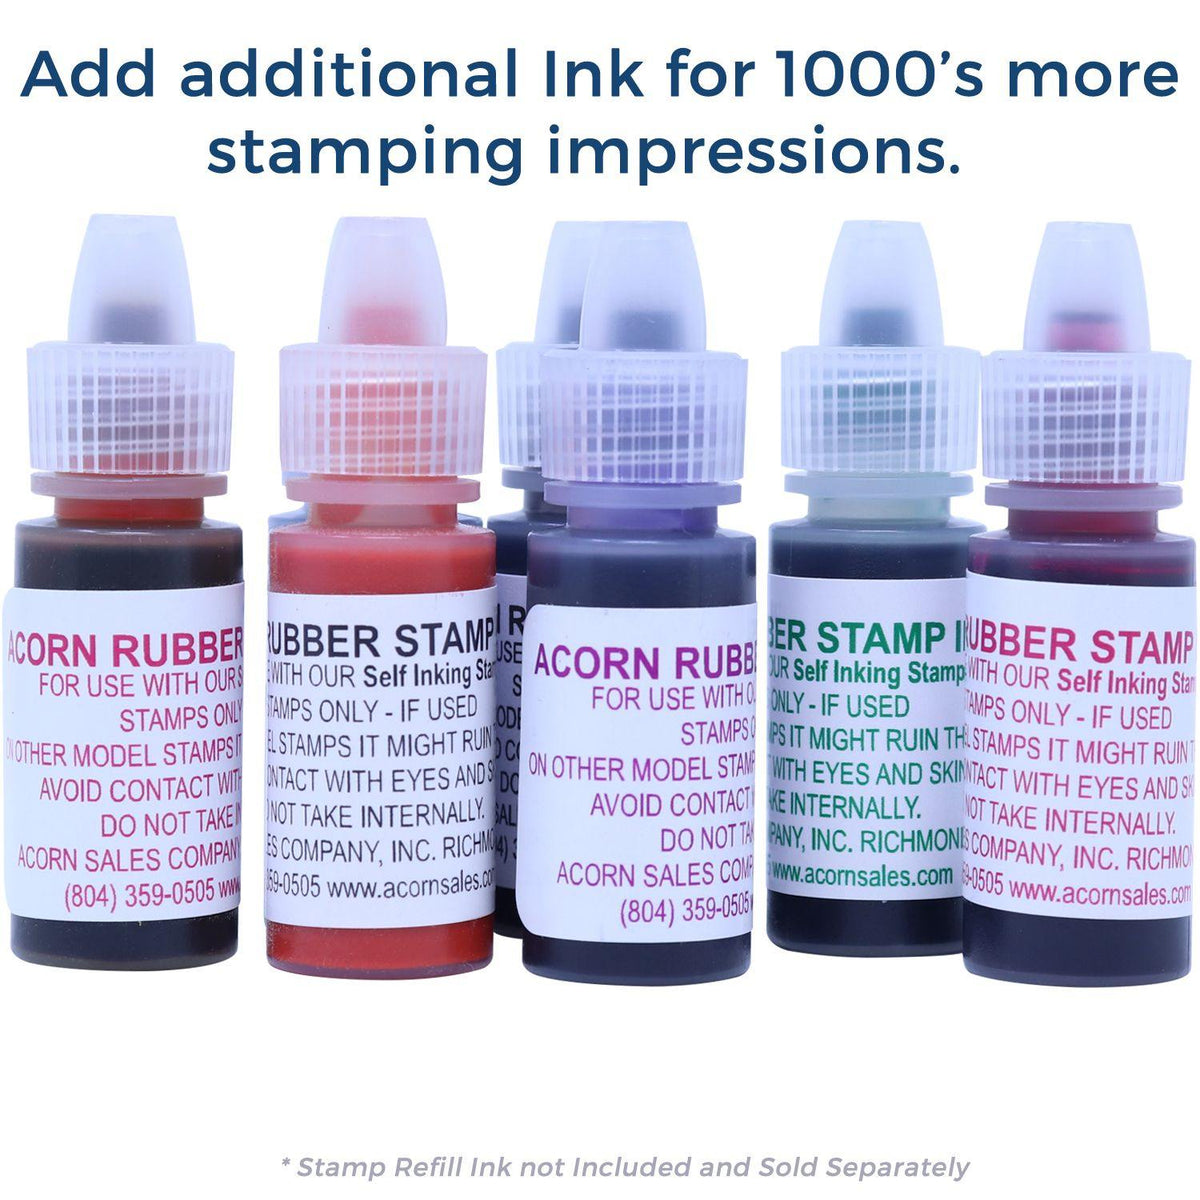 Refill Inks for Slim Pre Inked Trustee Exhibit Stamp Available